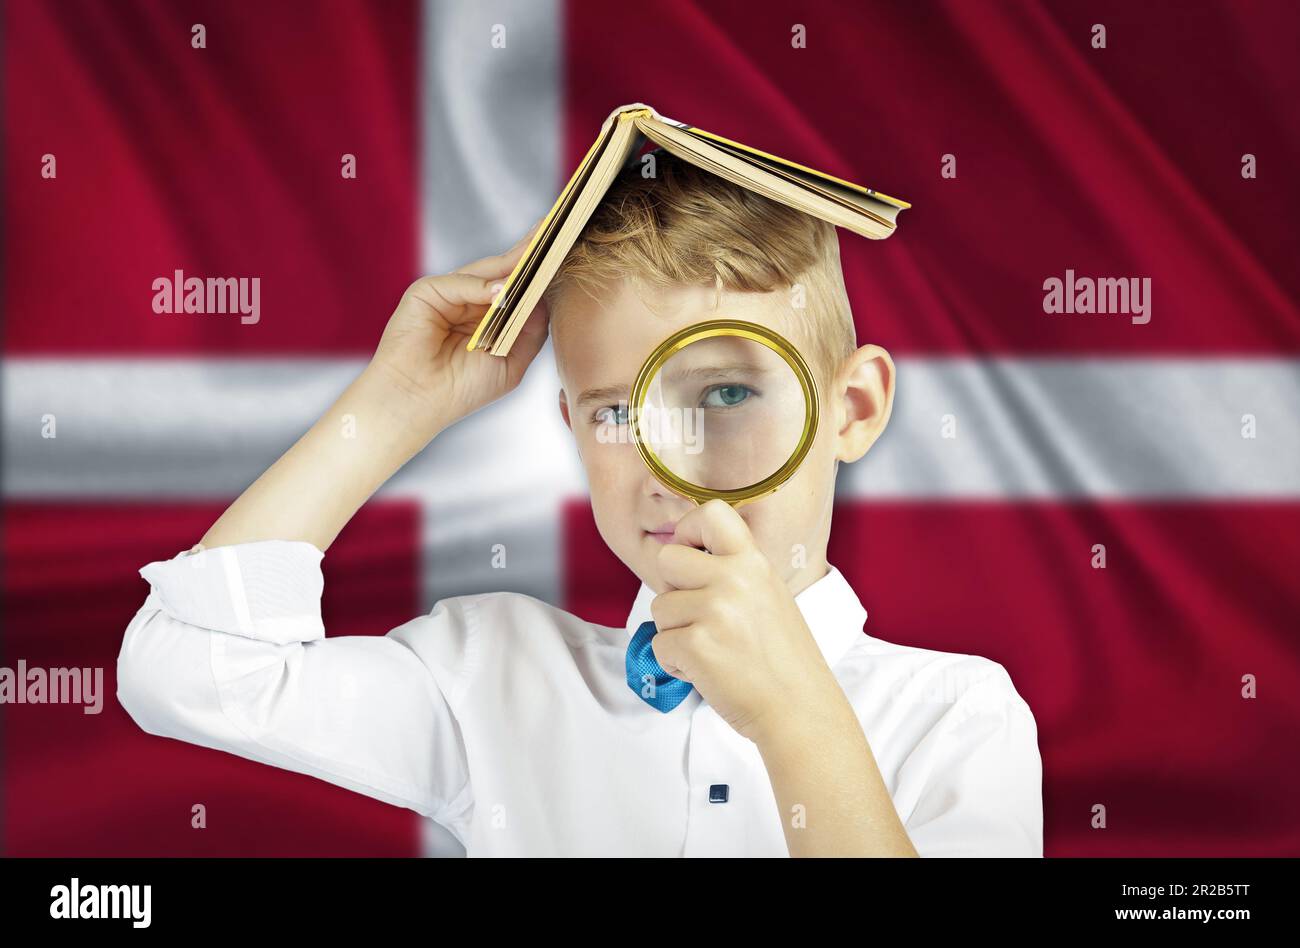 A boy with a book on his head looks through a magnifying glass at the background of the Danish flag.Education concept. Stock Photo